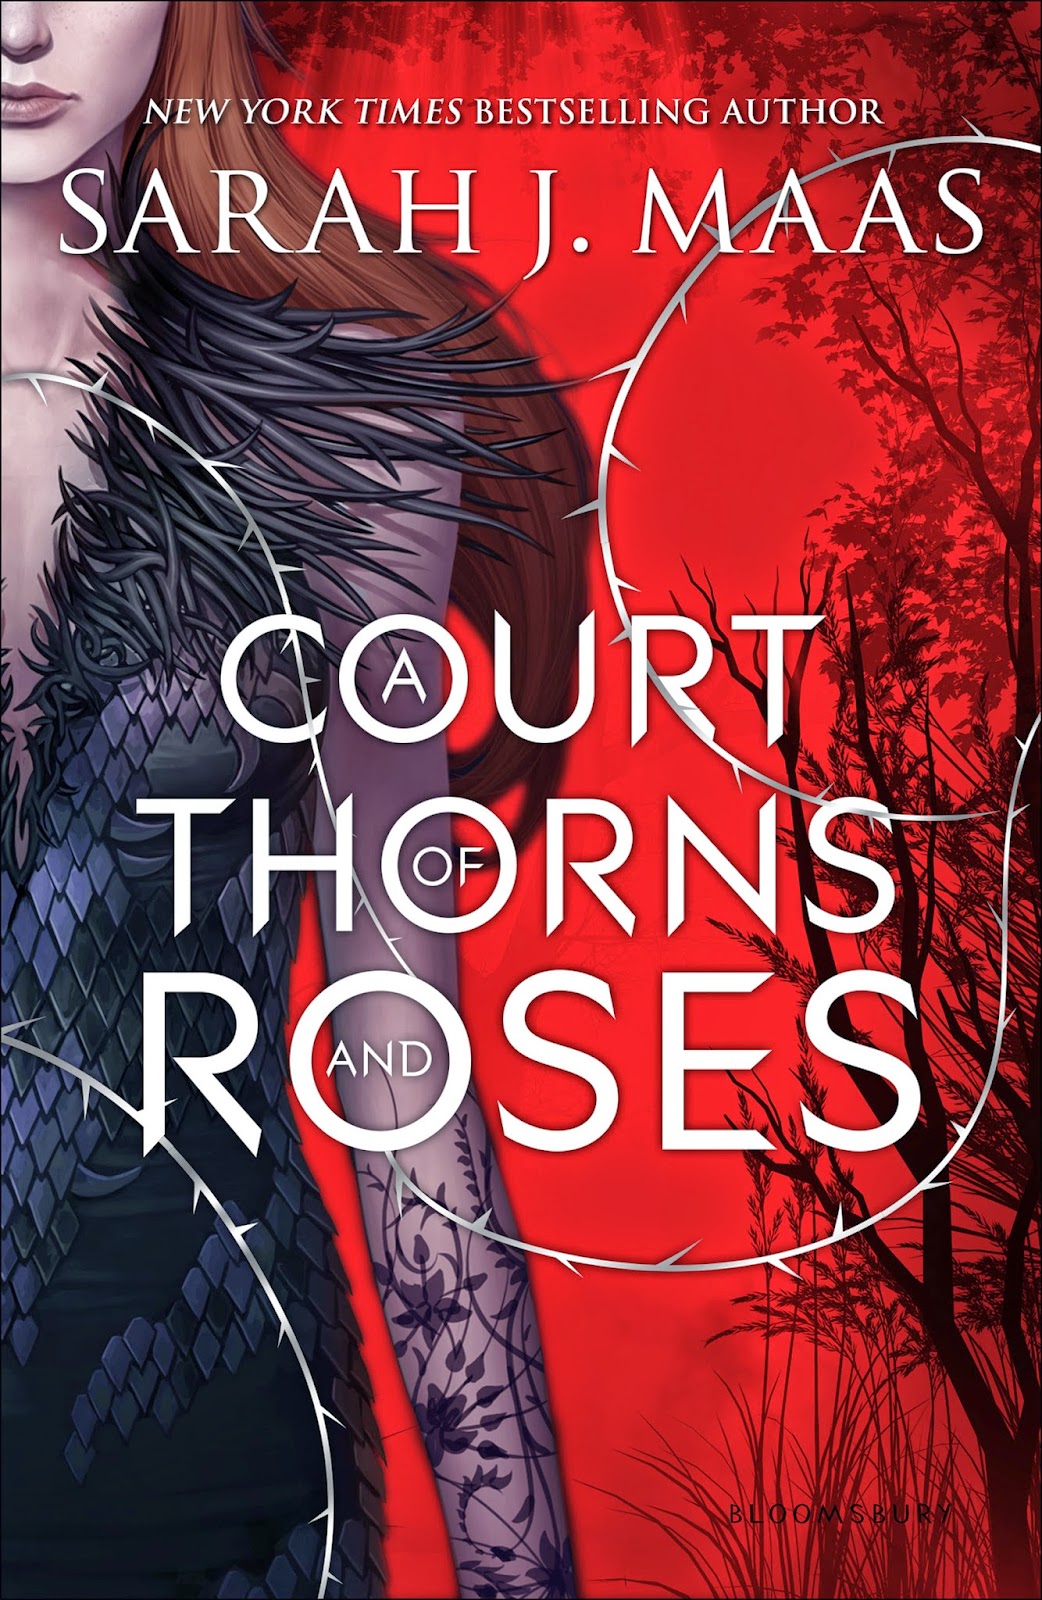 A court of thorns and roses.jpg